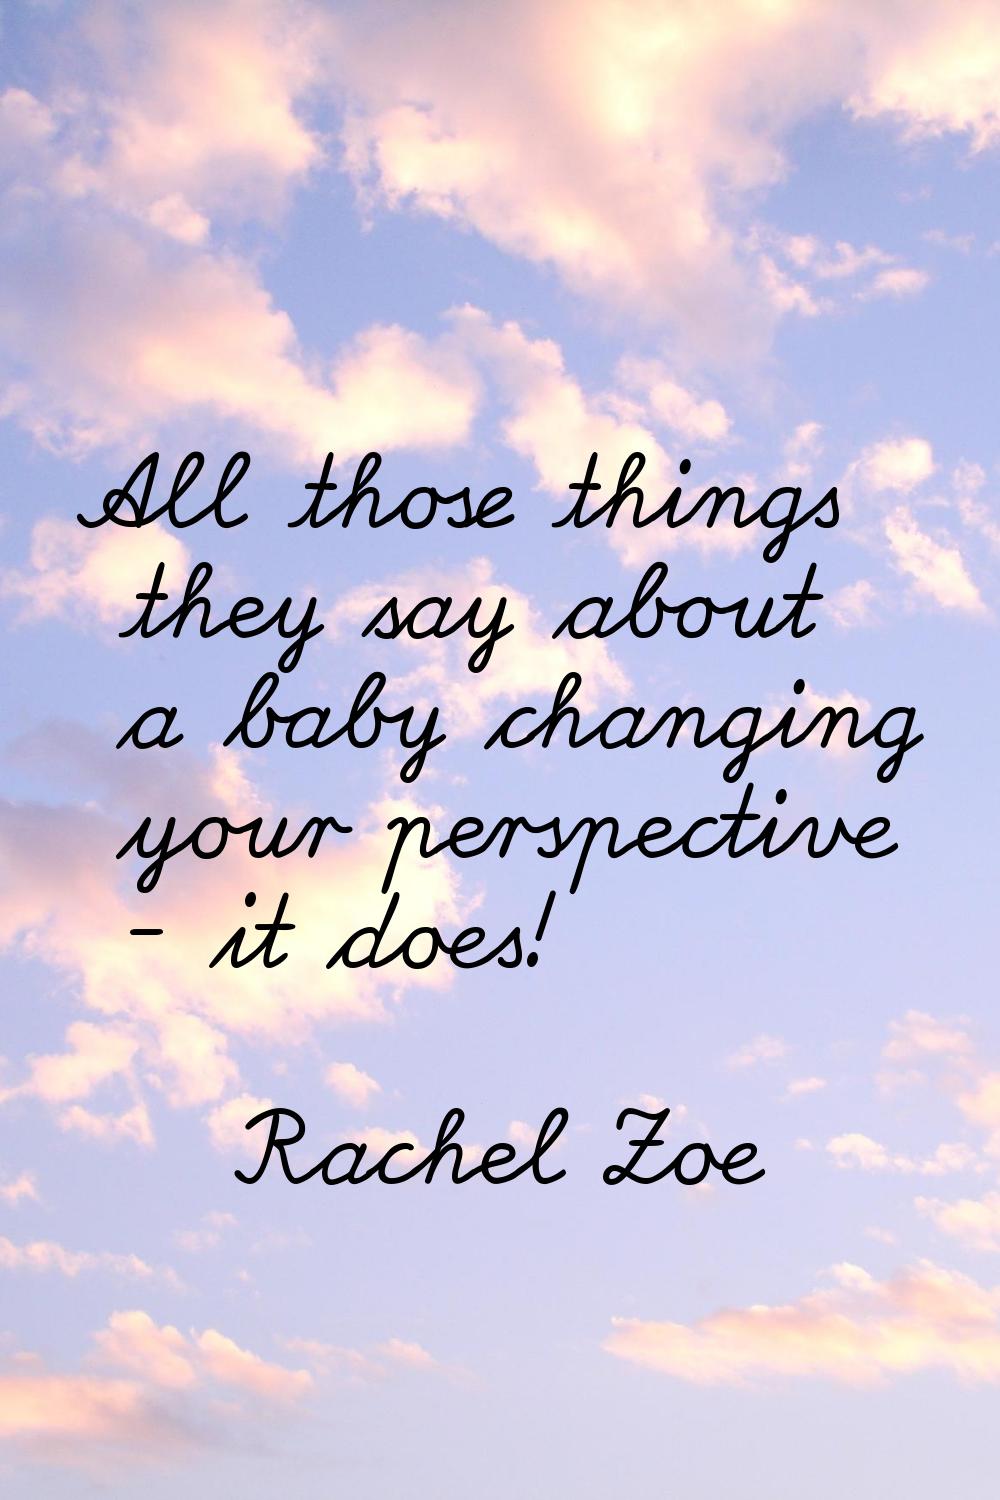 All those things they say about a baby changing your perspective - it does!